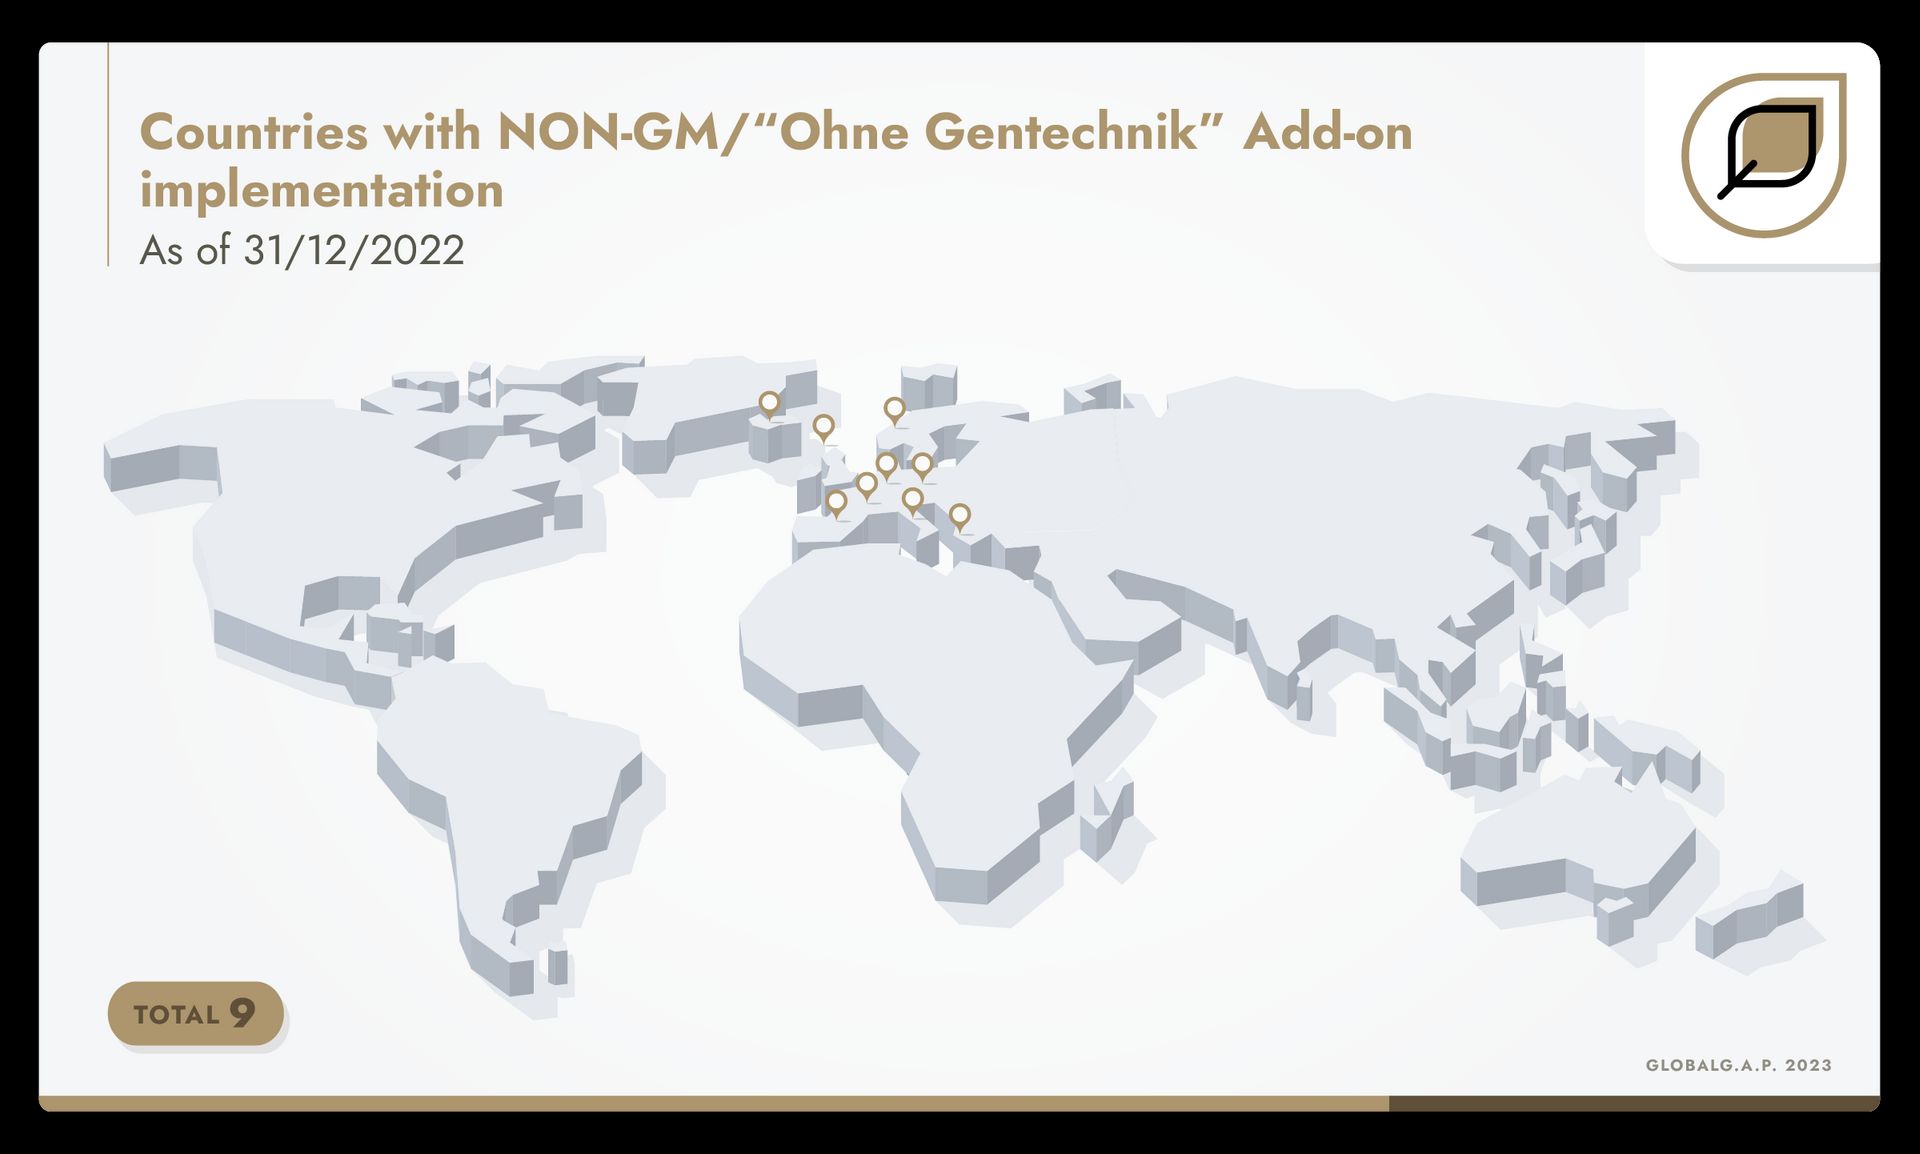 Infographic of a world map identifying countries with NON-GM/“Ohne Gentechnik” Add-on implementation: Faroe Islands, France, Germany, Greece, Hungary, Iceland, Italy, Norway, Poland 